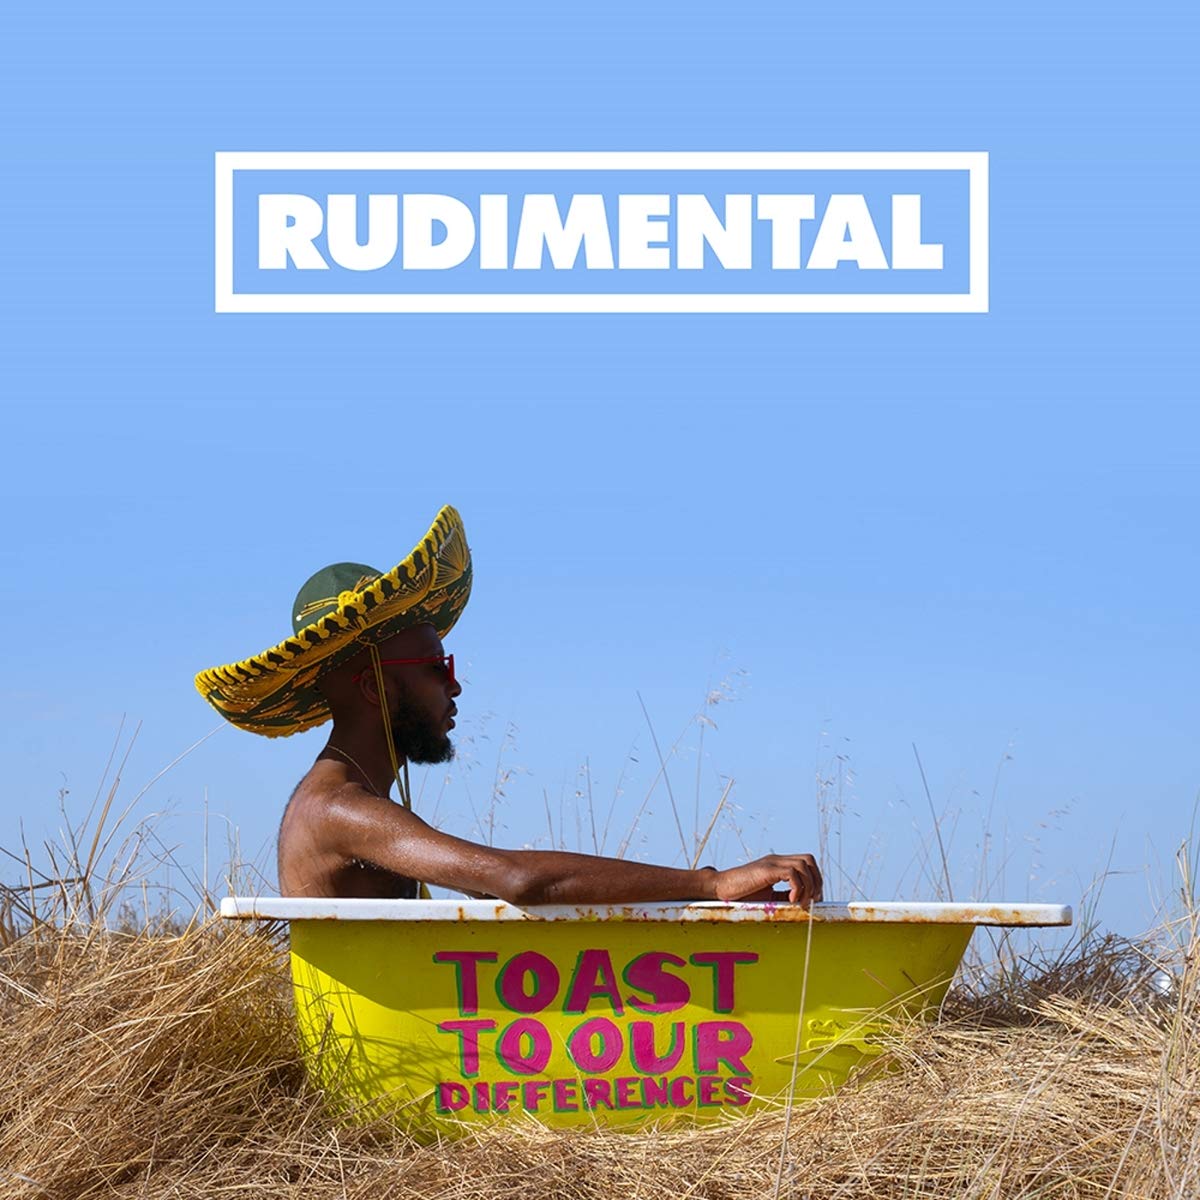 Rudimental – Toast to our Differences (Deluxe Edition) (2019) [FLAC 24bit/44,1kHz]